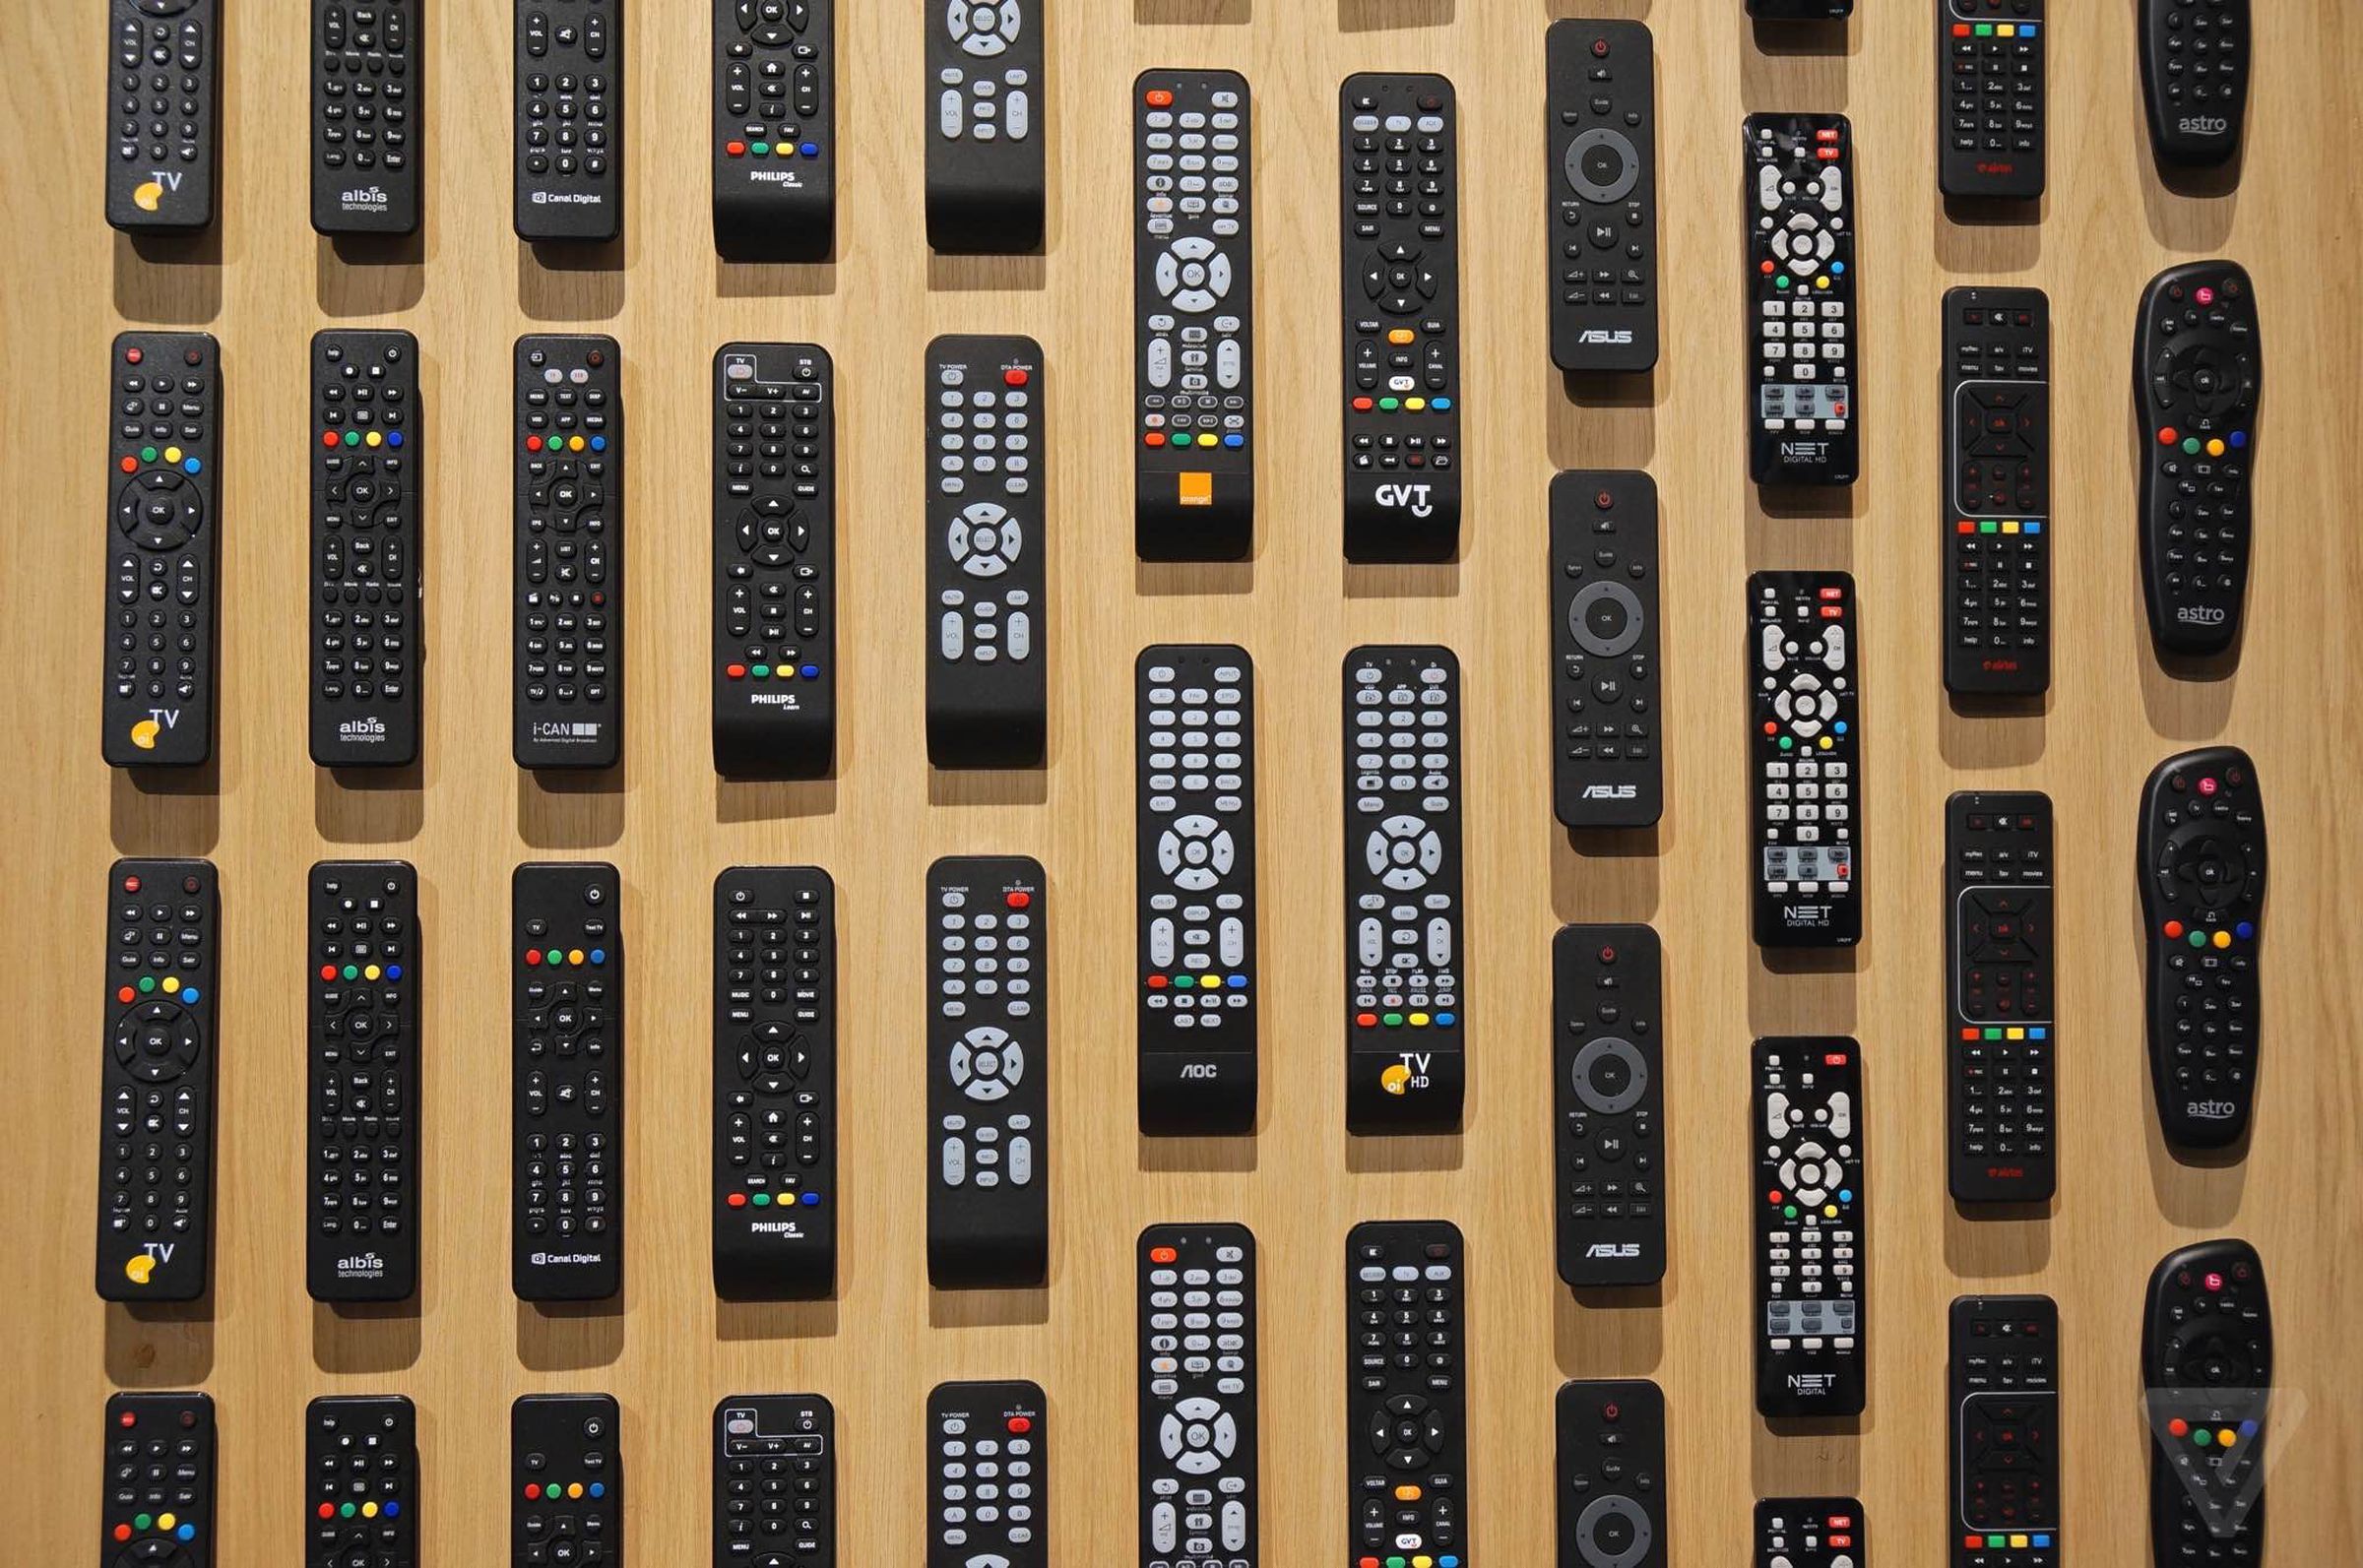 Philips remote controls at CES 2015